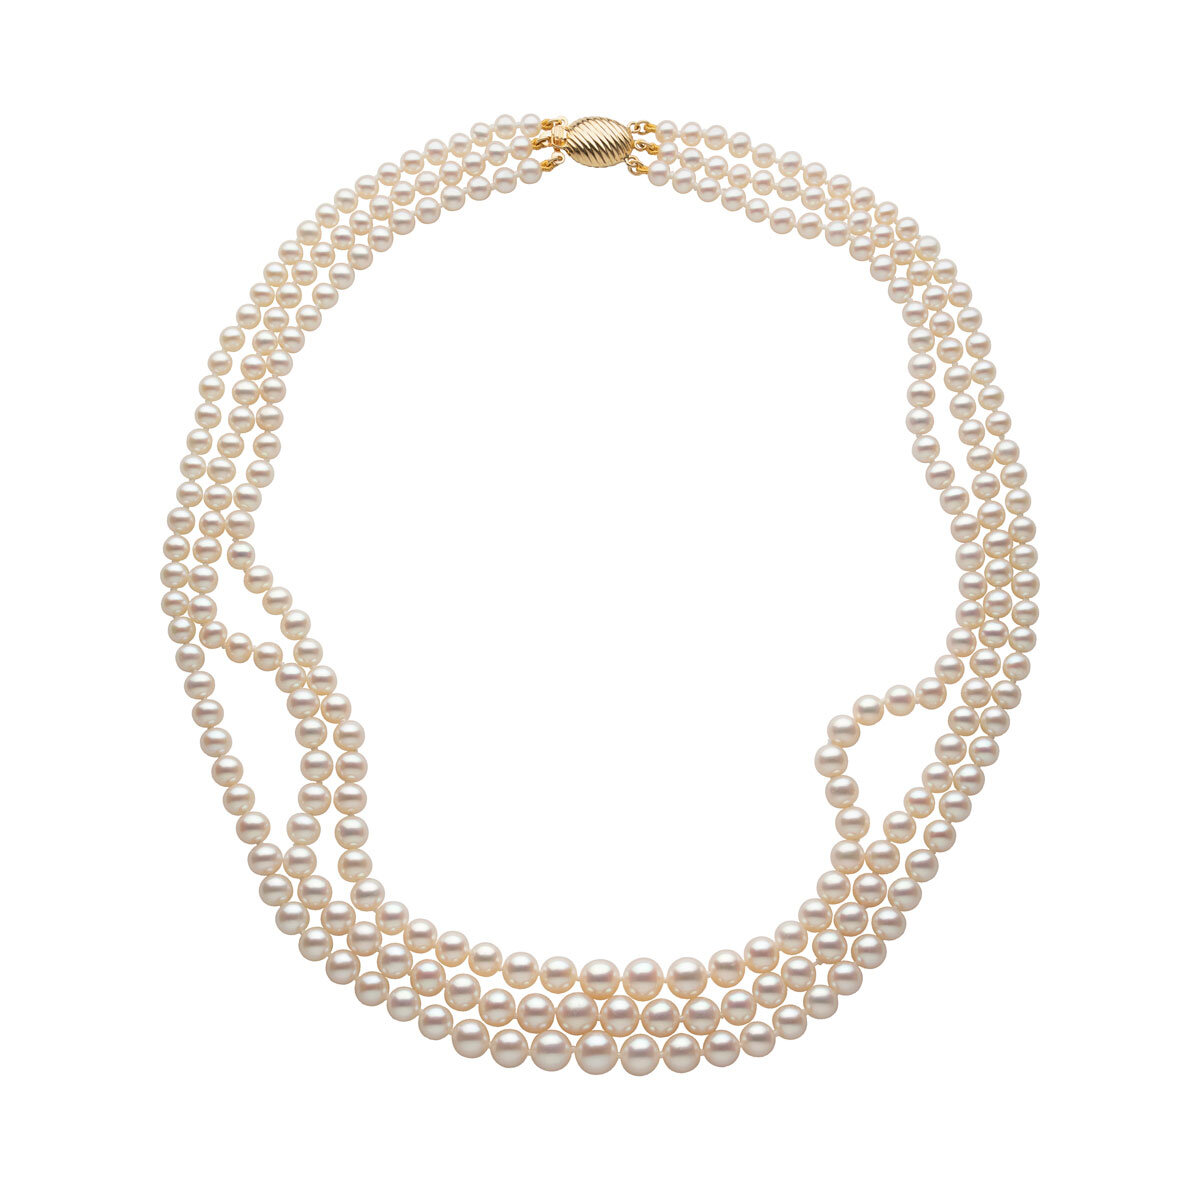 3-7mm Cultured Freshwater White 3 Strand Graduated Pearl Necklace, 18ct Yellow Gold